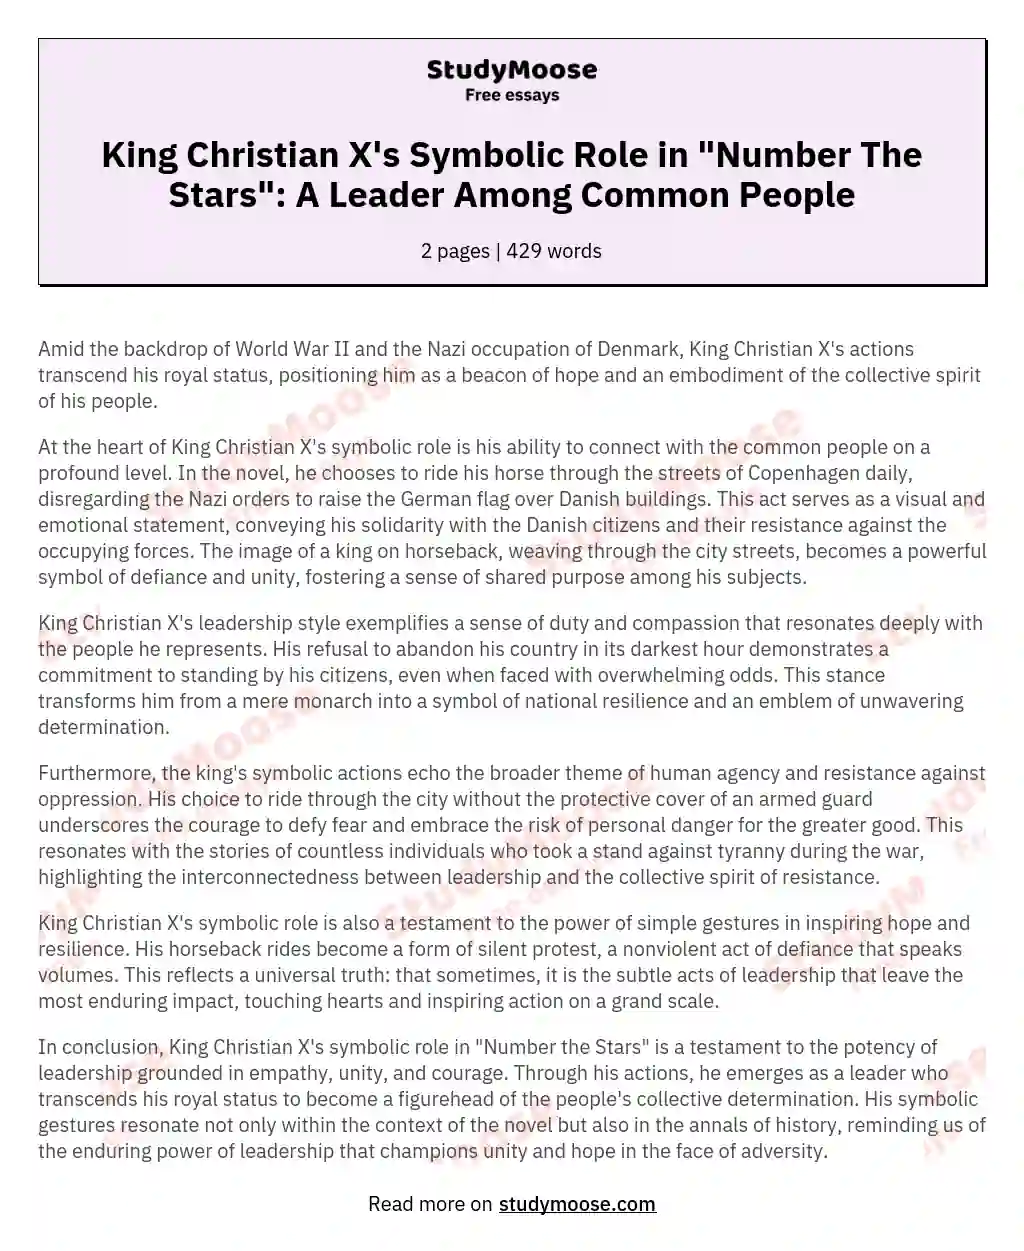 King Christian X's Symbolic Role in "Number The Stars": A Leader Among Common People essay